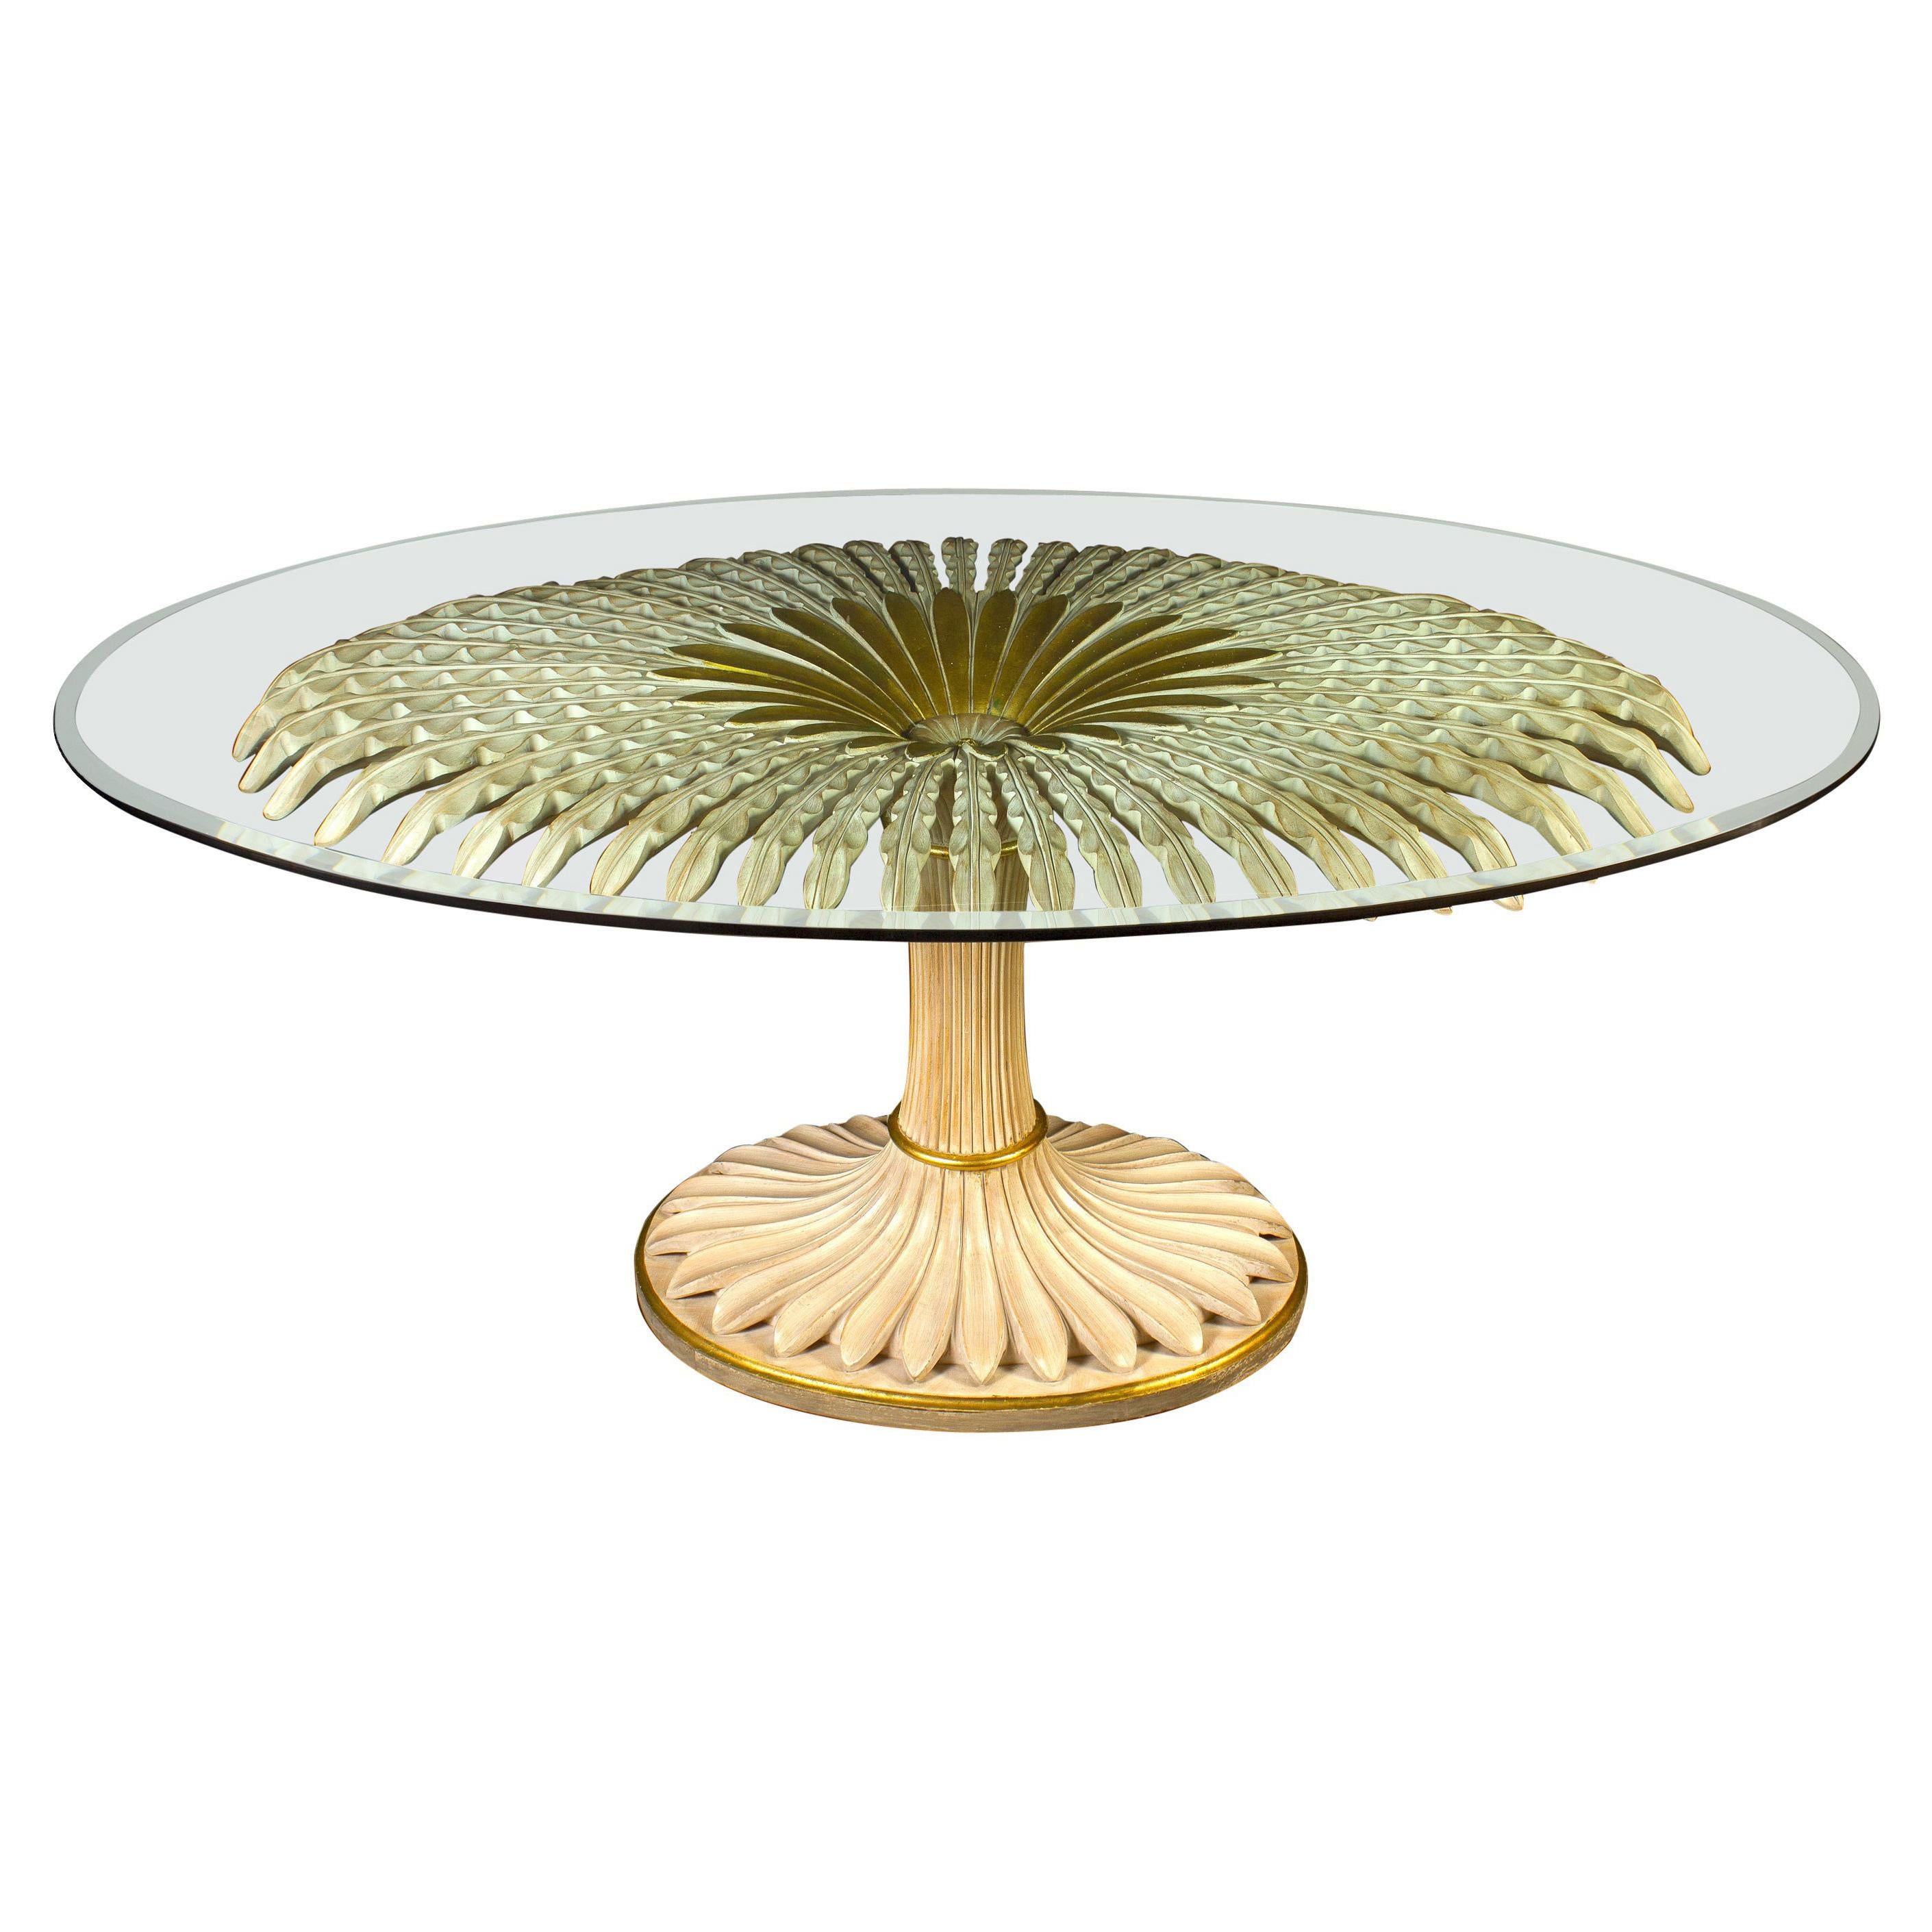 Striking Giltwood and Painted Palm Sculpture Dining or Center Table, Italy, 1970